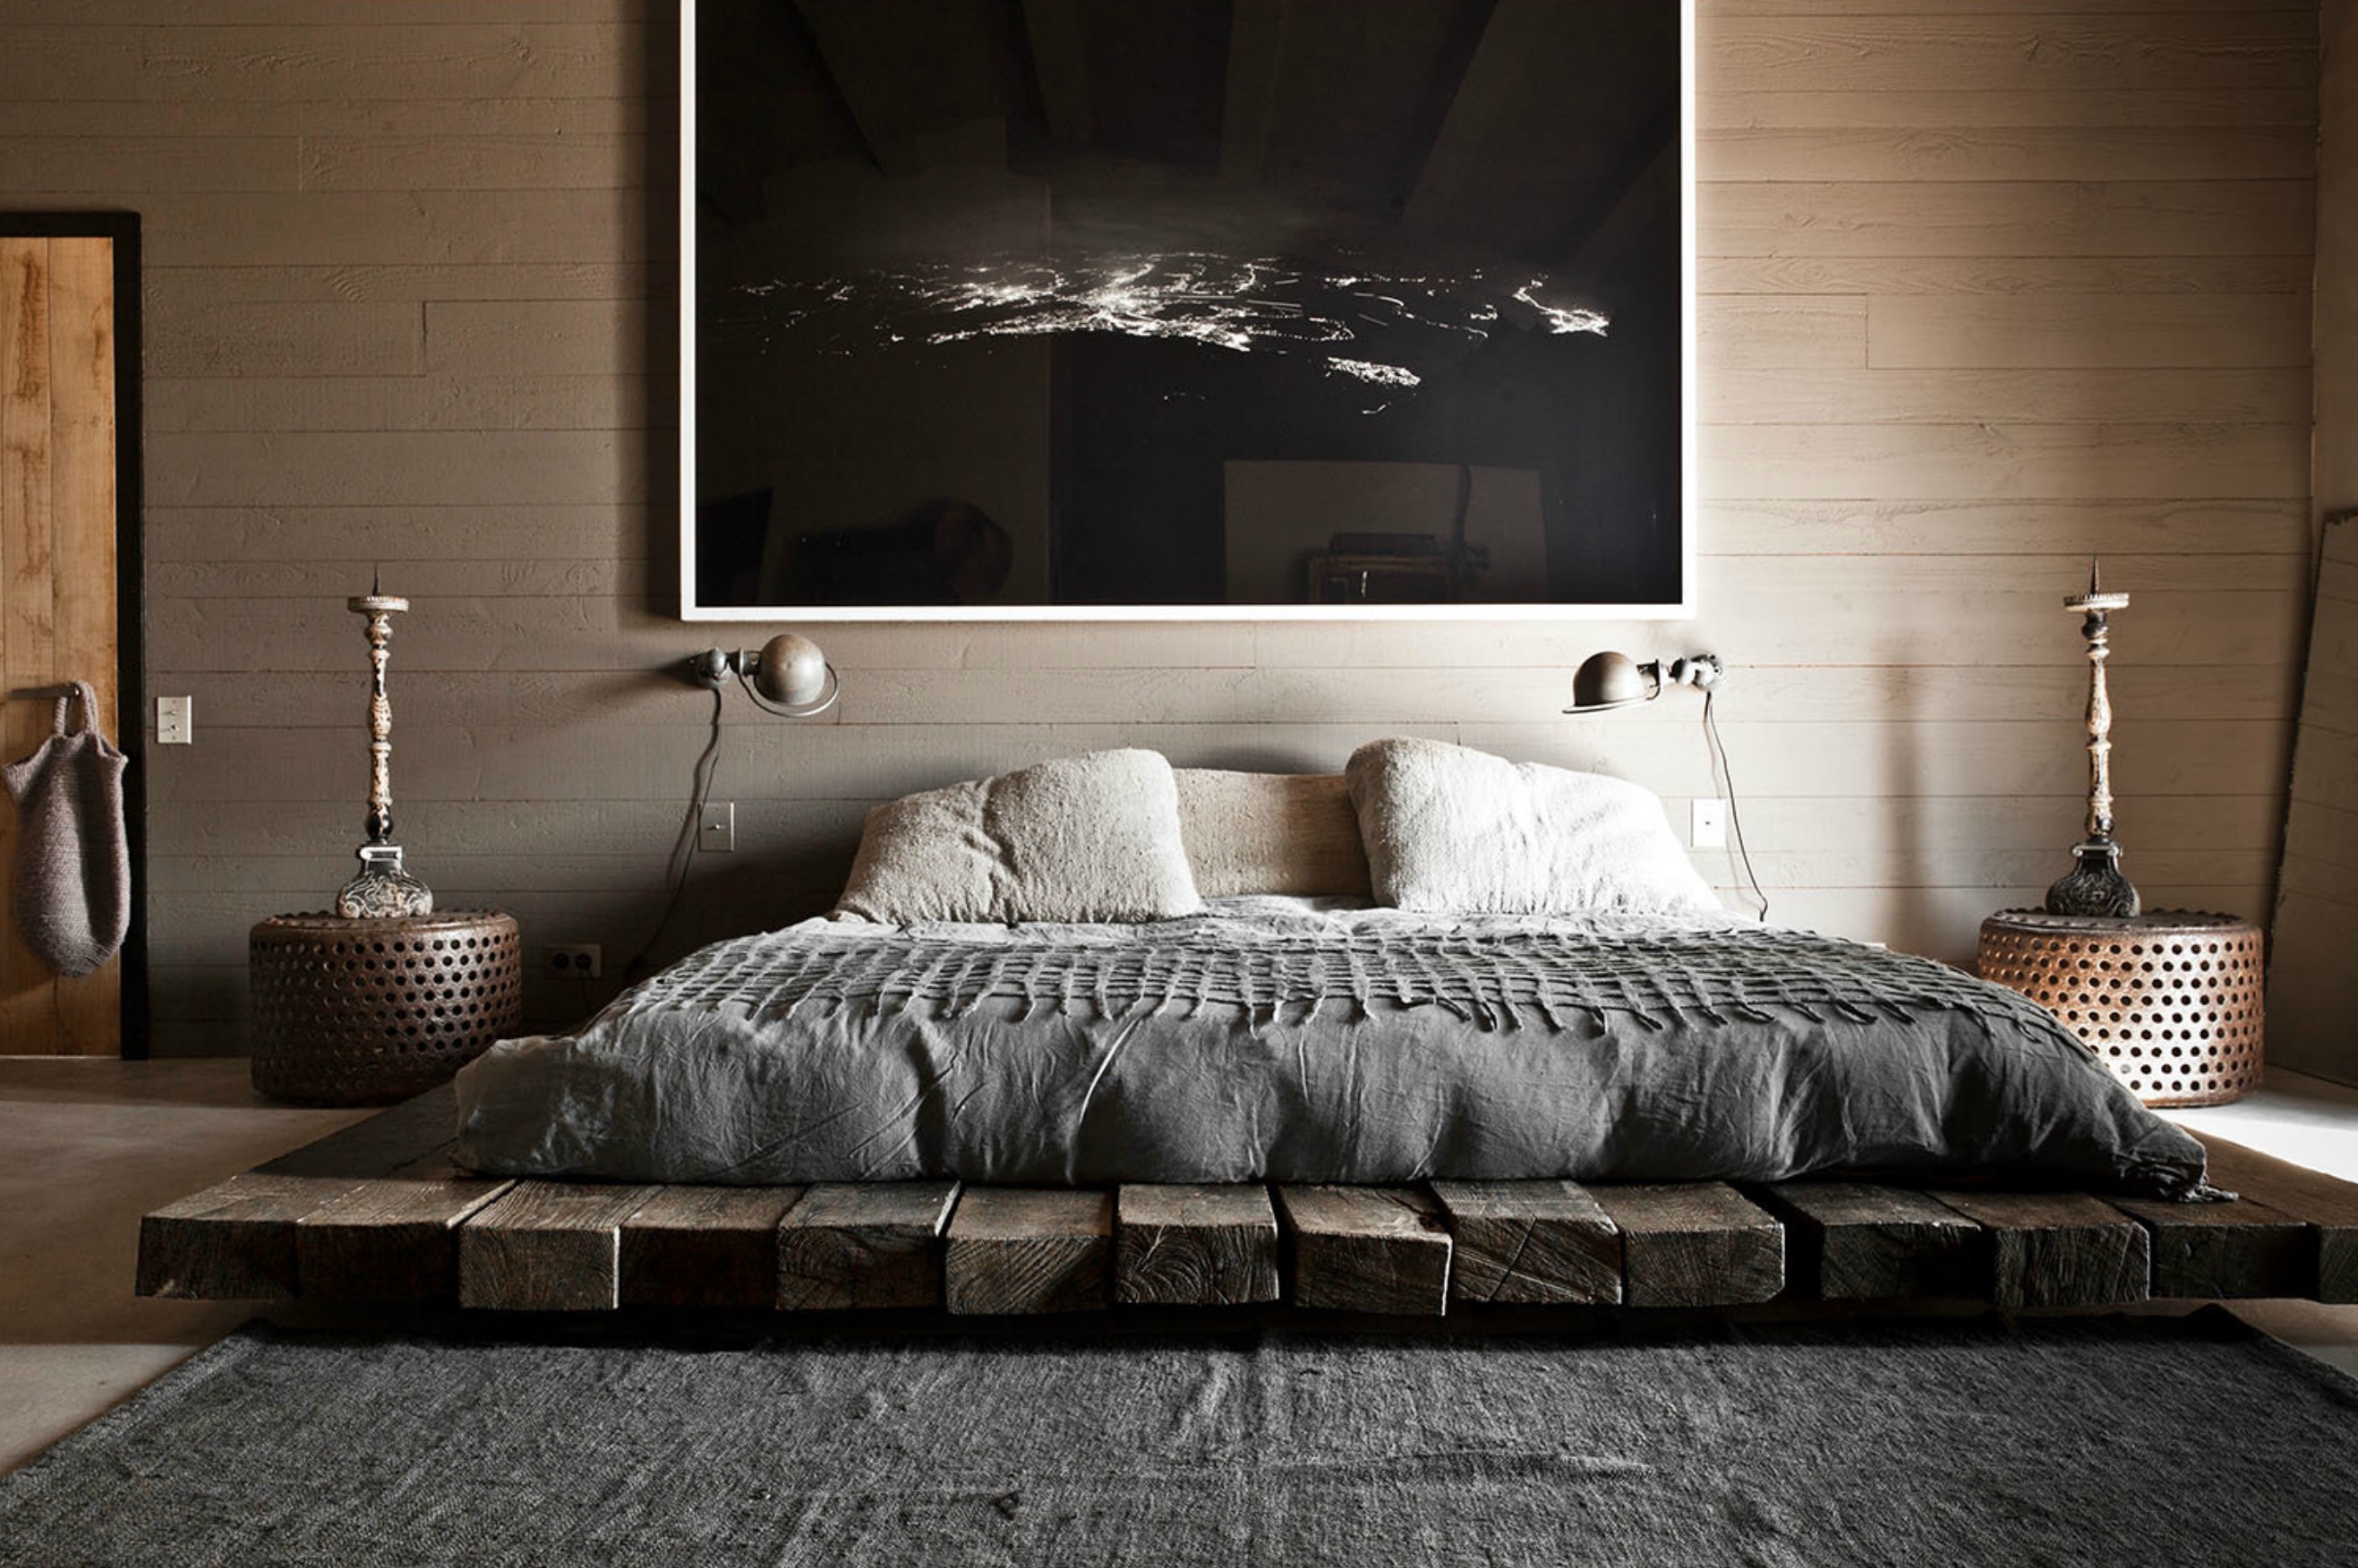 40 low height & floor bed designs that will make you sleepy